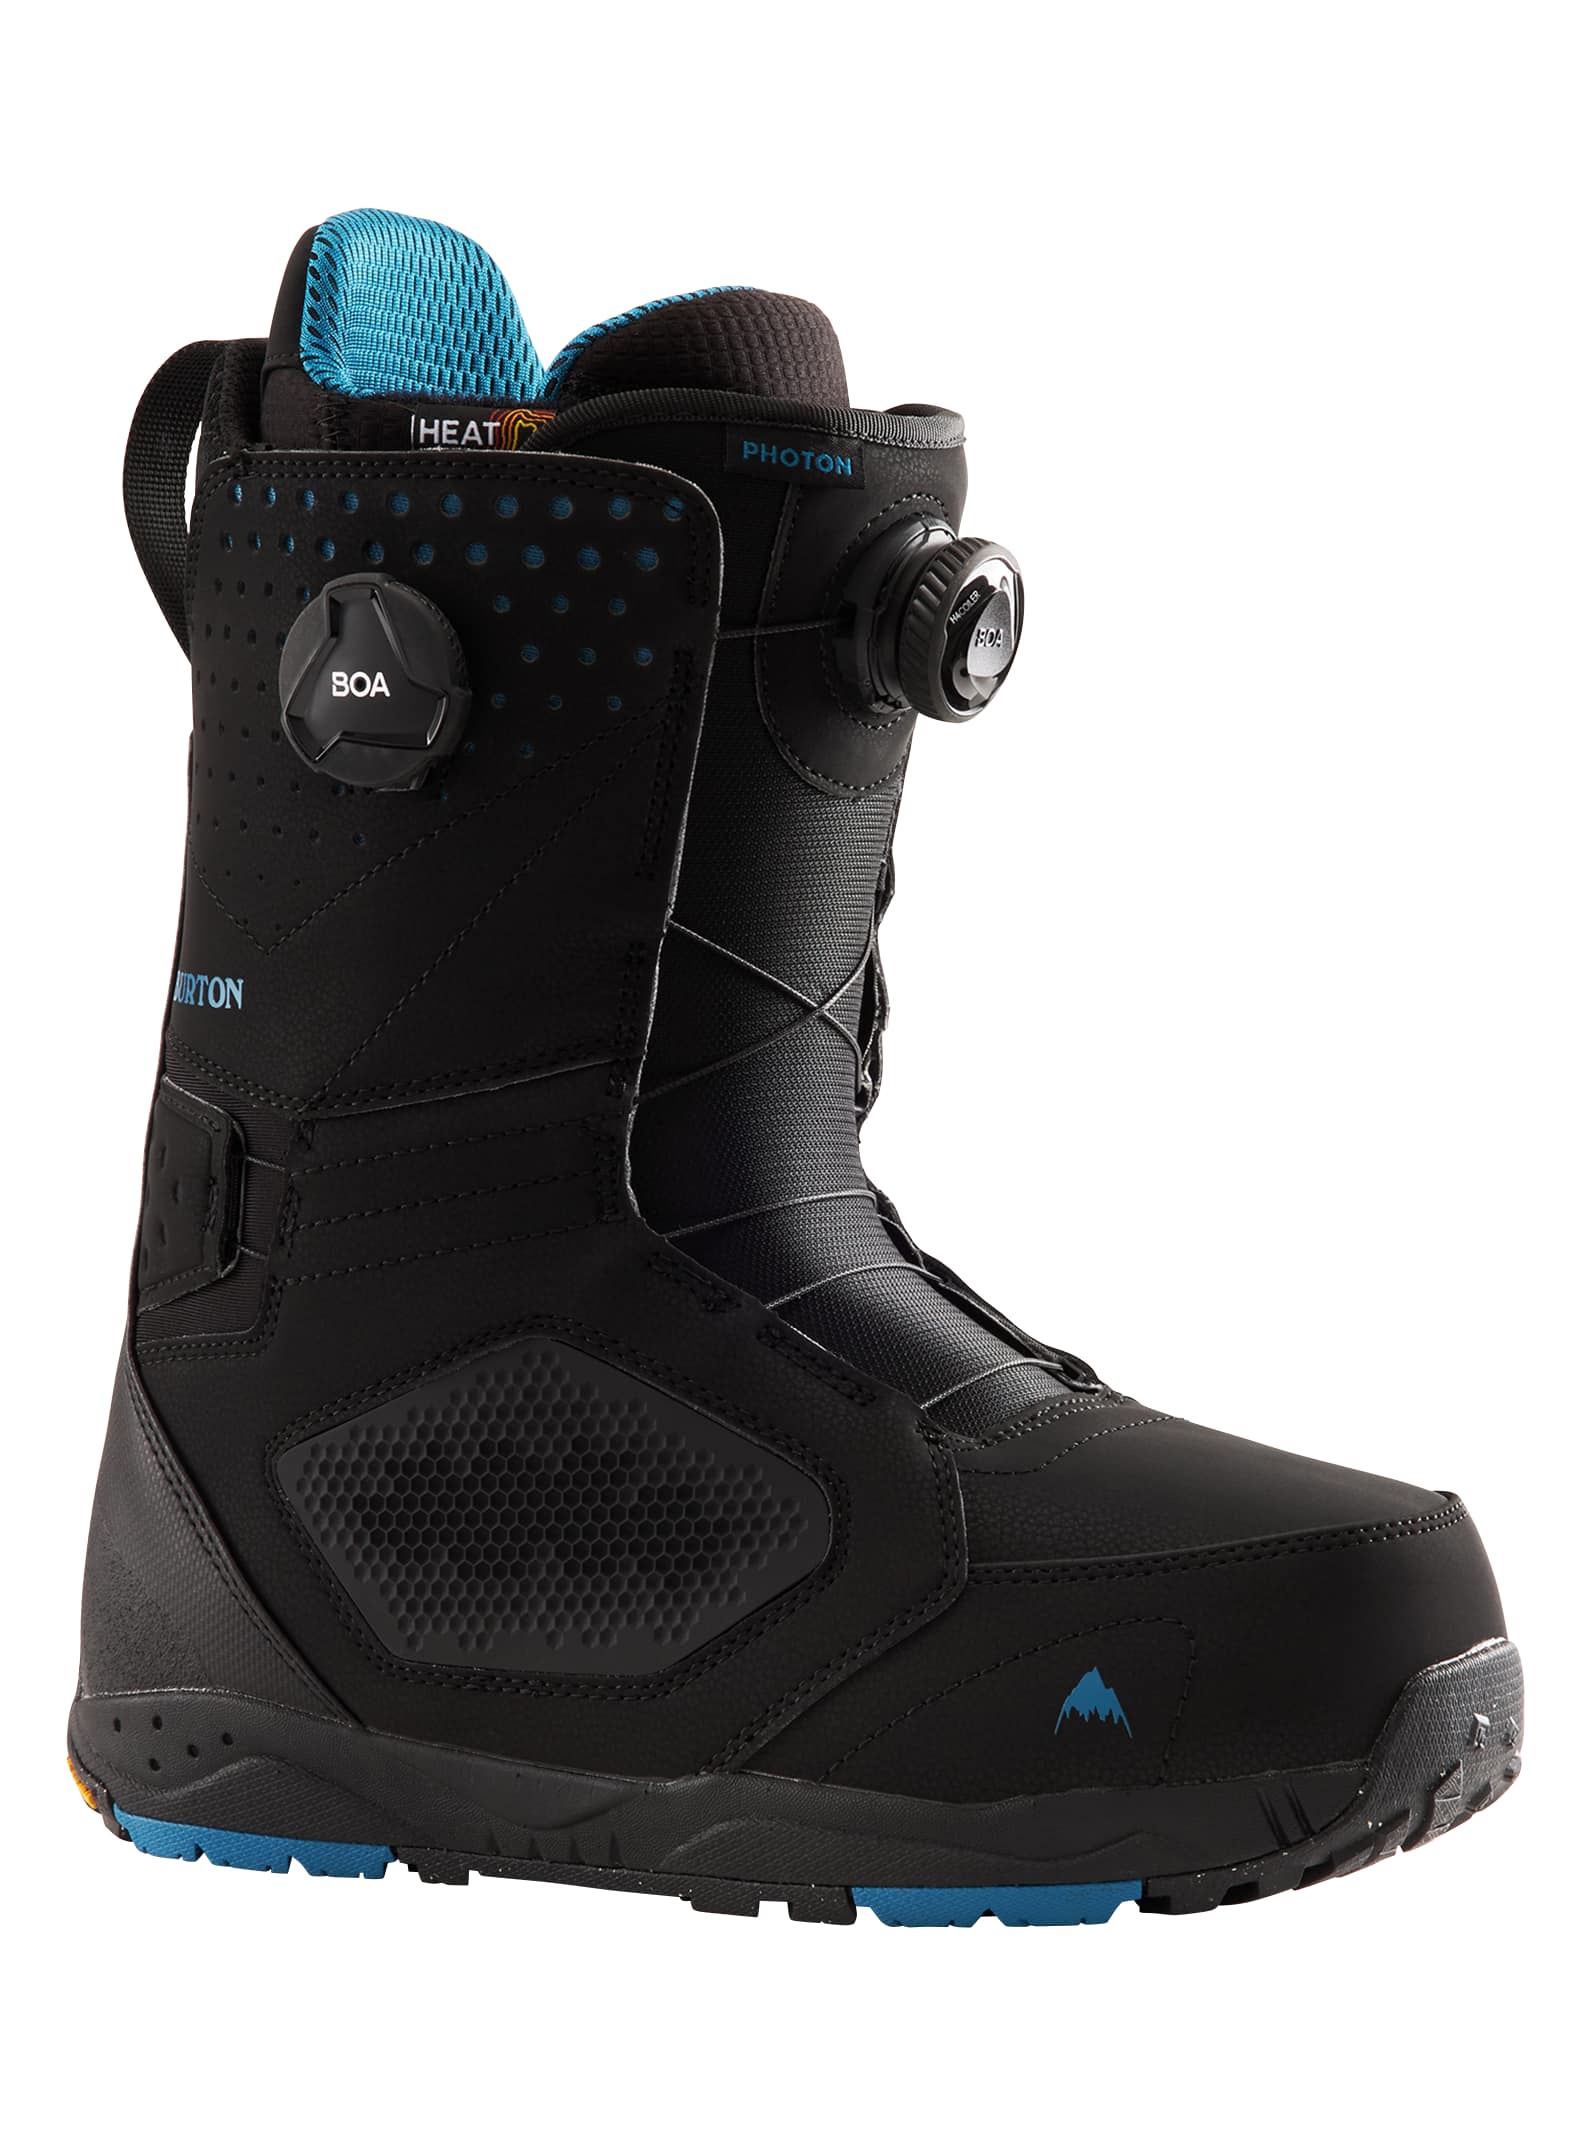 Men's Snowboard Boots - Shop the Collection Online Now